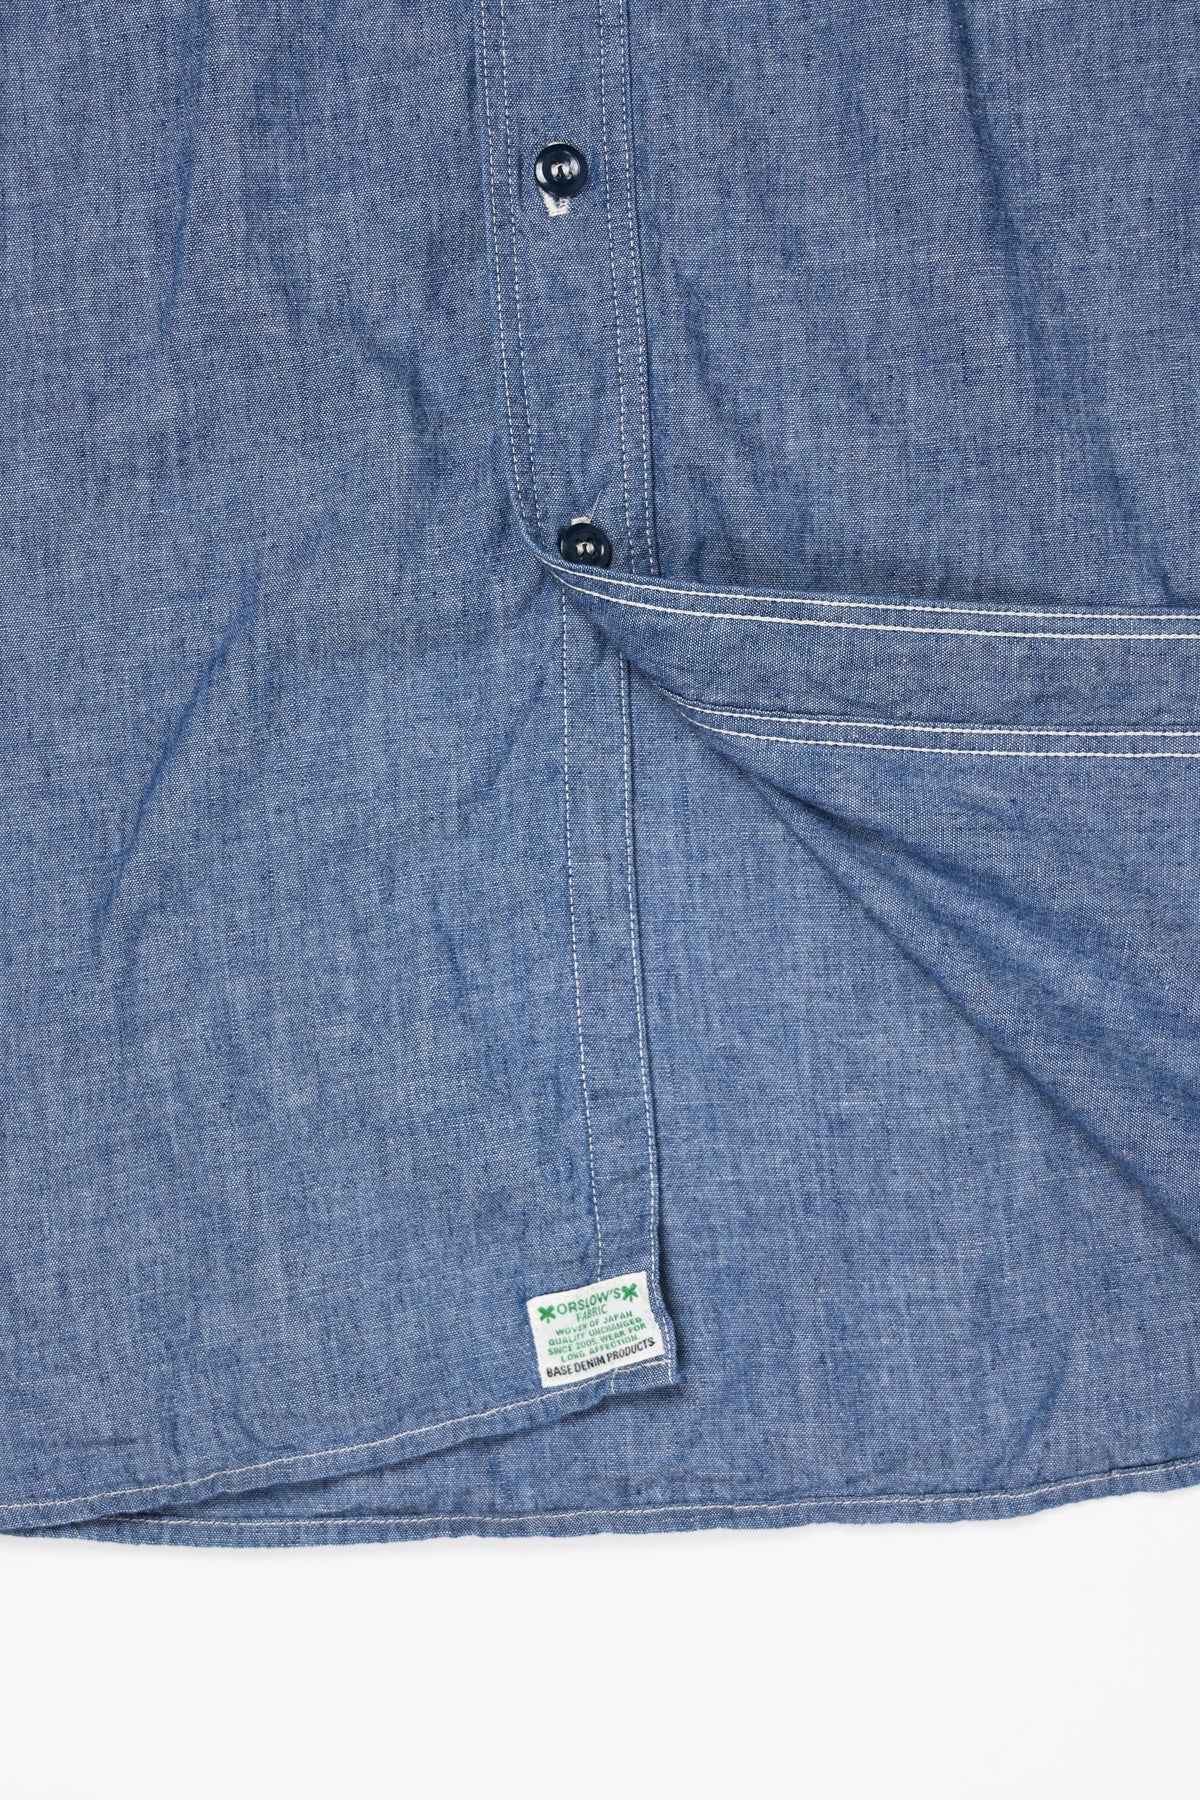 Orslow Vintage Fit Work Shirt - Chambray 1